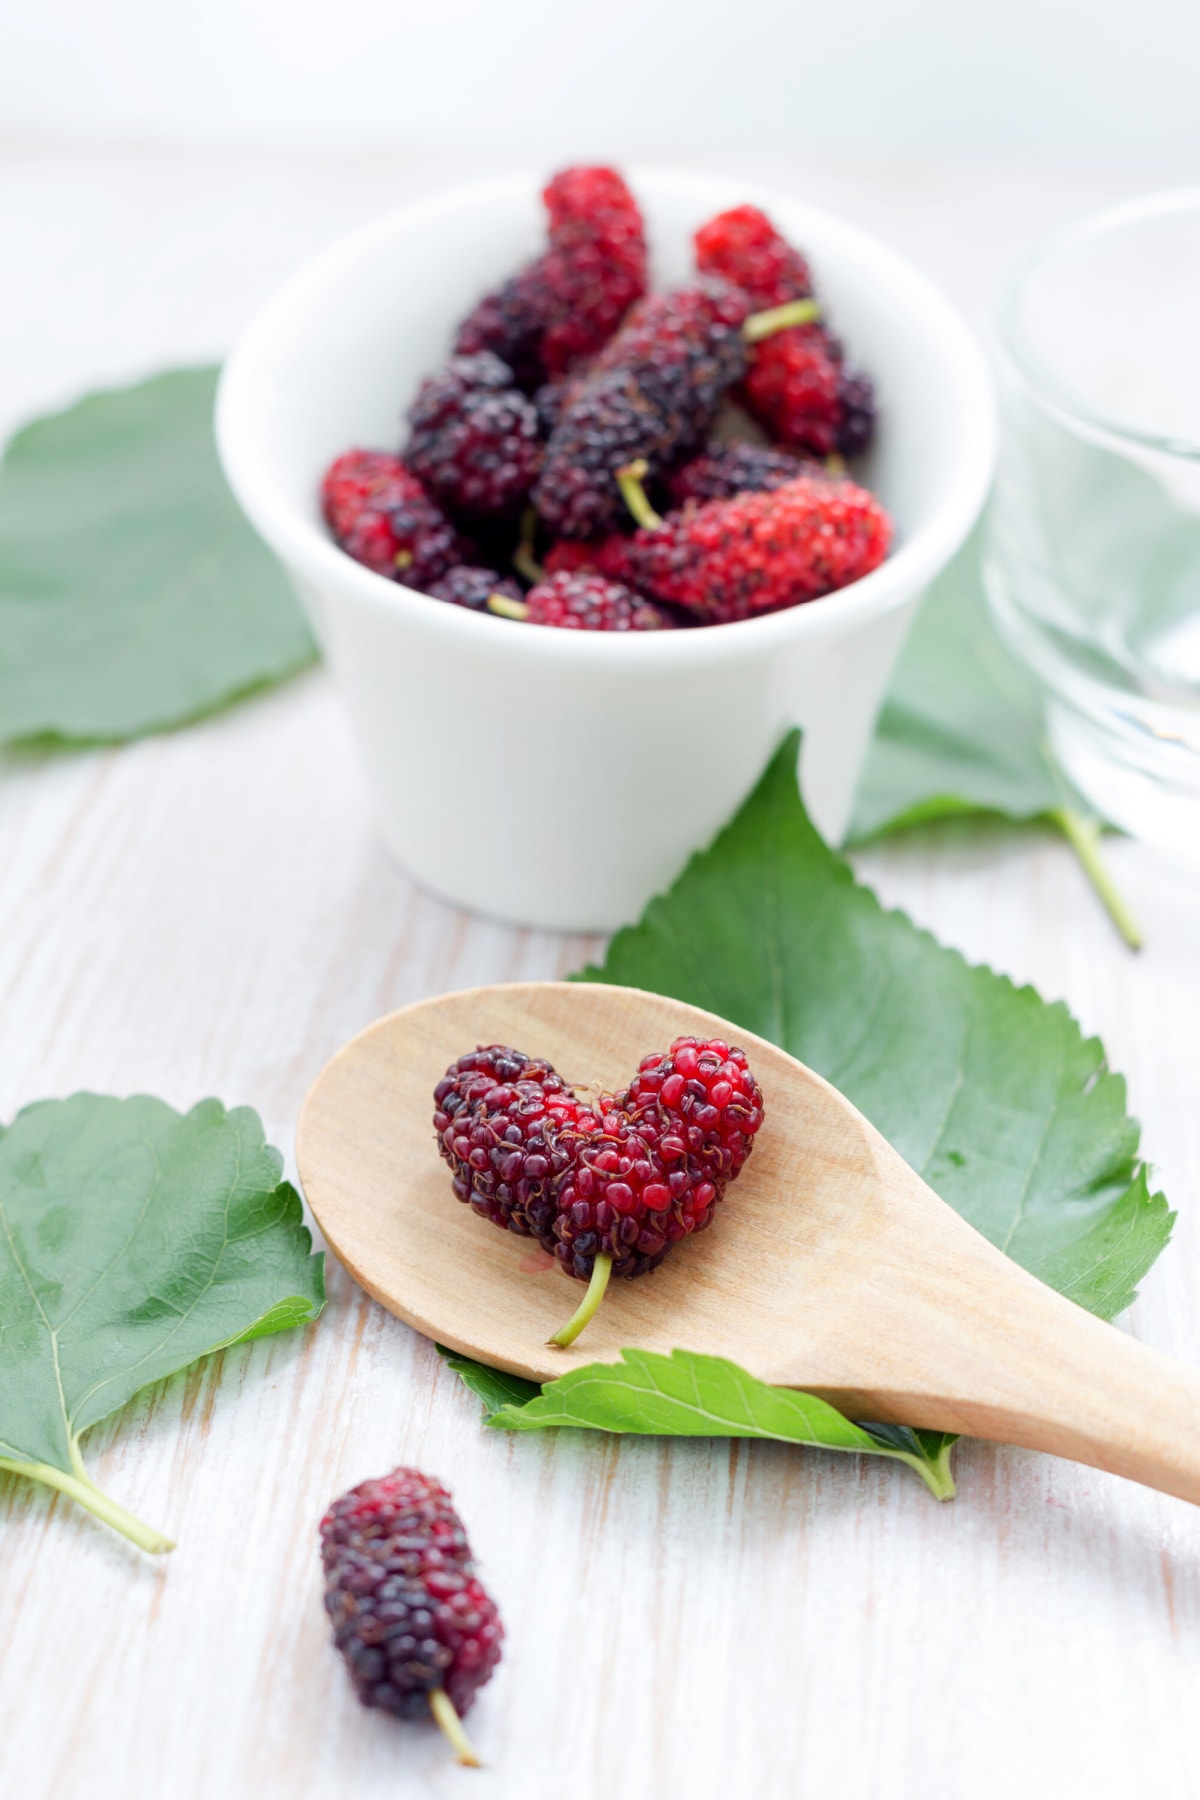 Amazing Mulberry Benefits for Skin Health